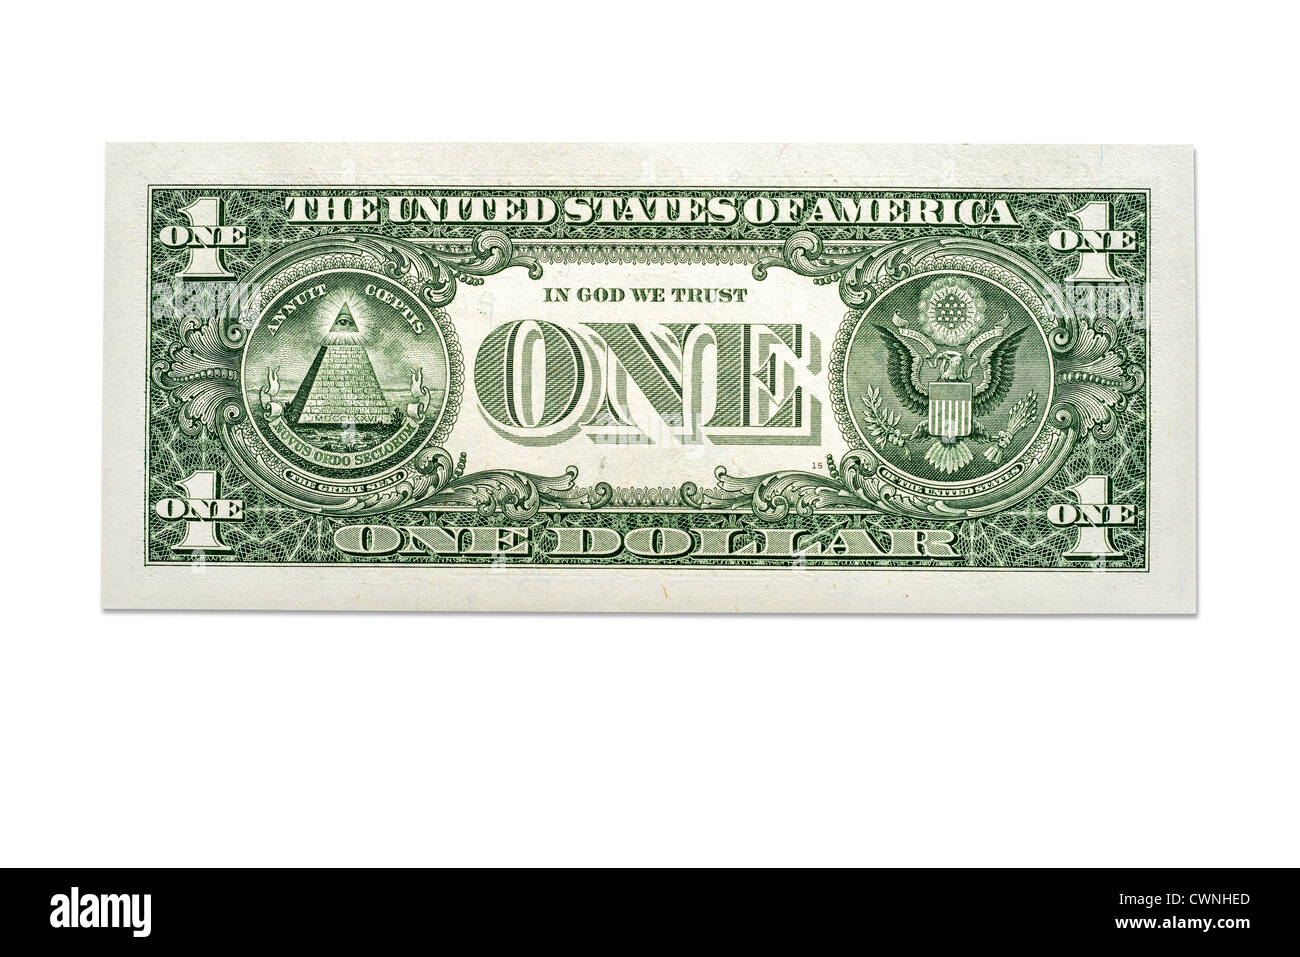 One-dollar bill, one dollar banknote, back side Stock Photo